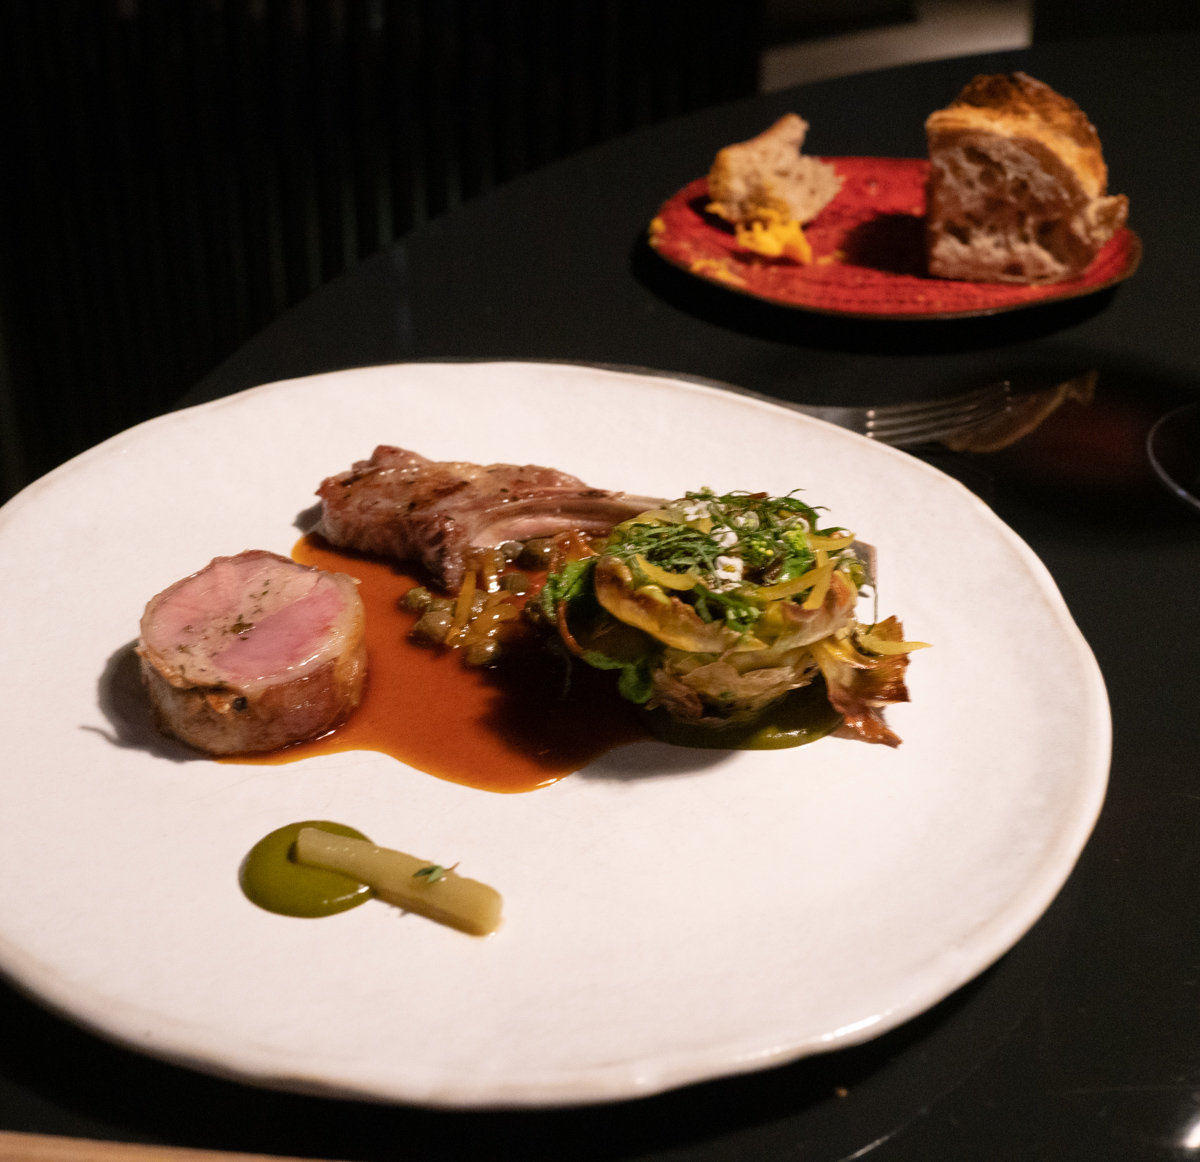 Bryan ordered the lamb as his entree, which came with two preparations: a seared lamb rib and a roulade.  On the side, a beautiful seared artichoke heart topped with a mint pesto